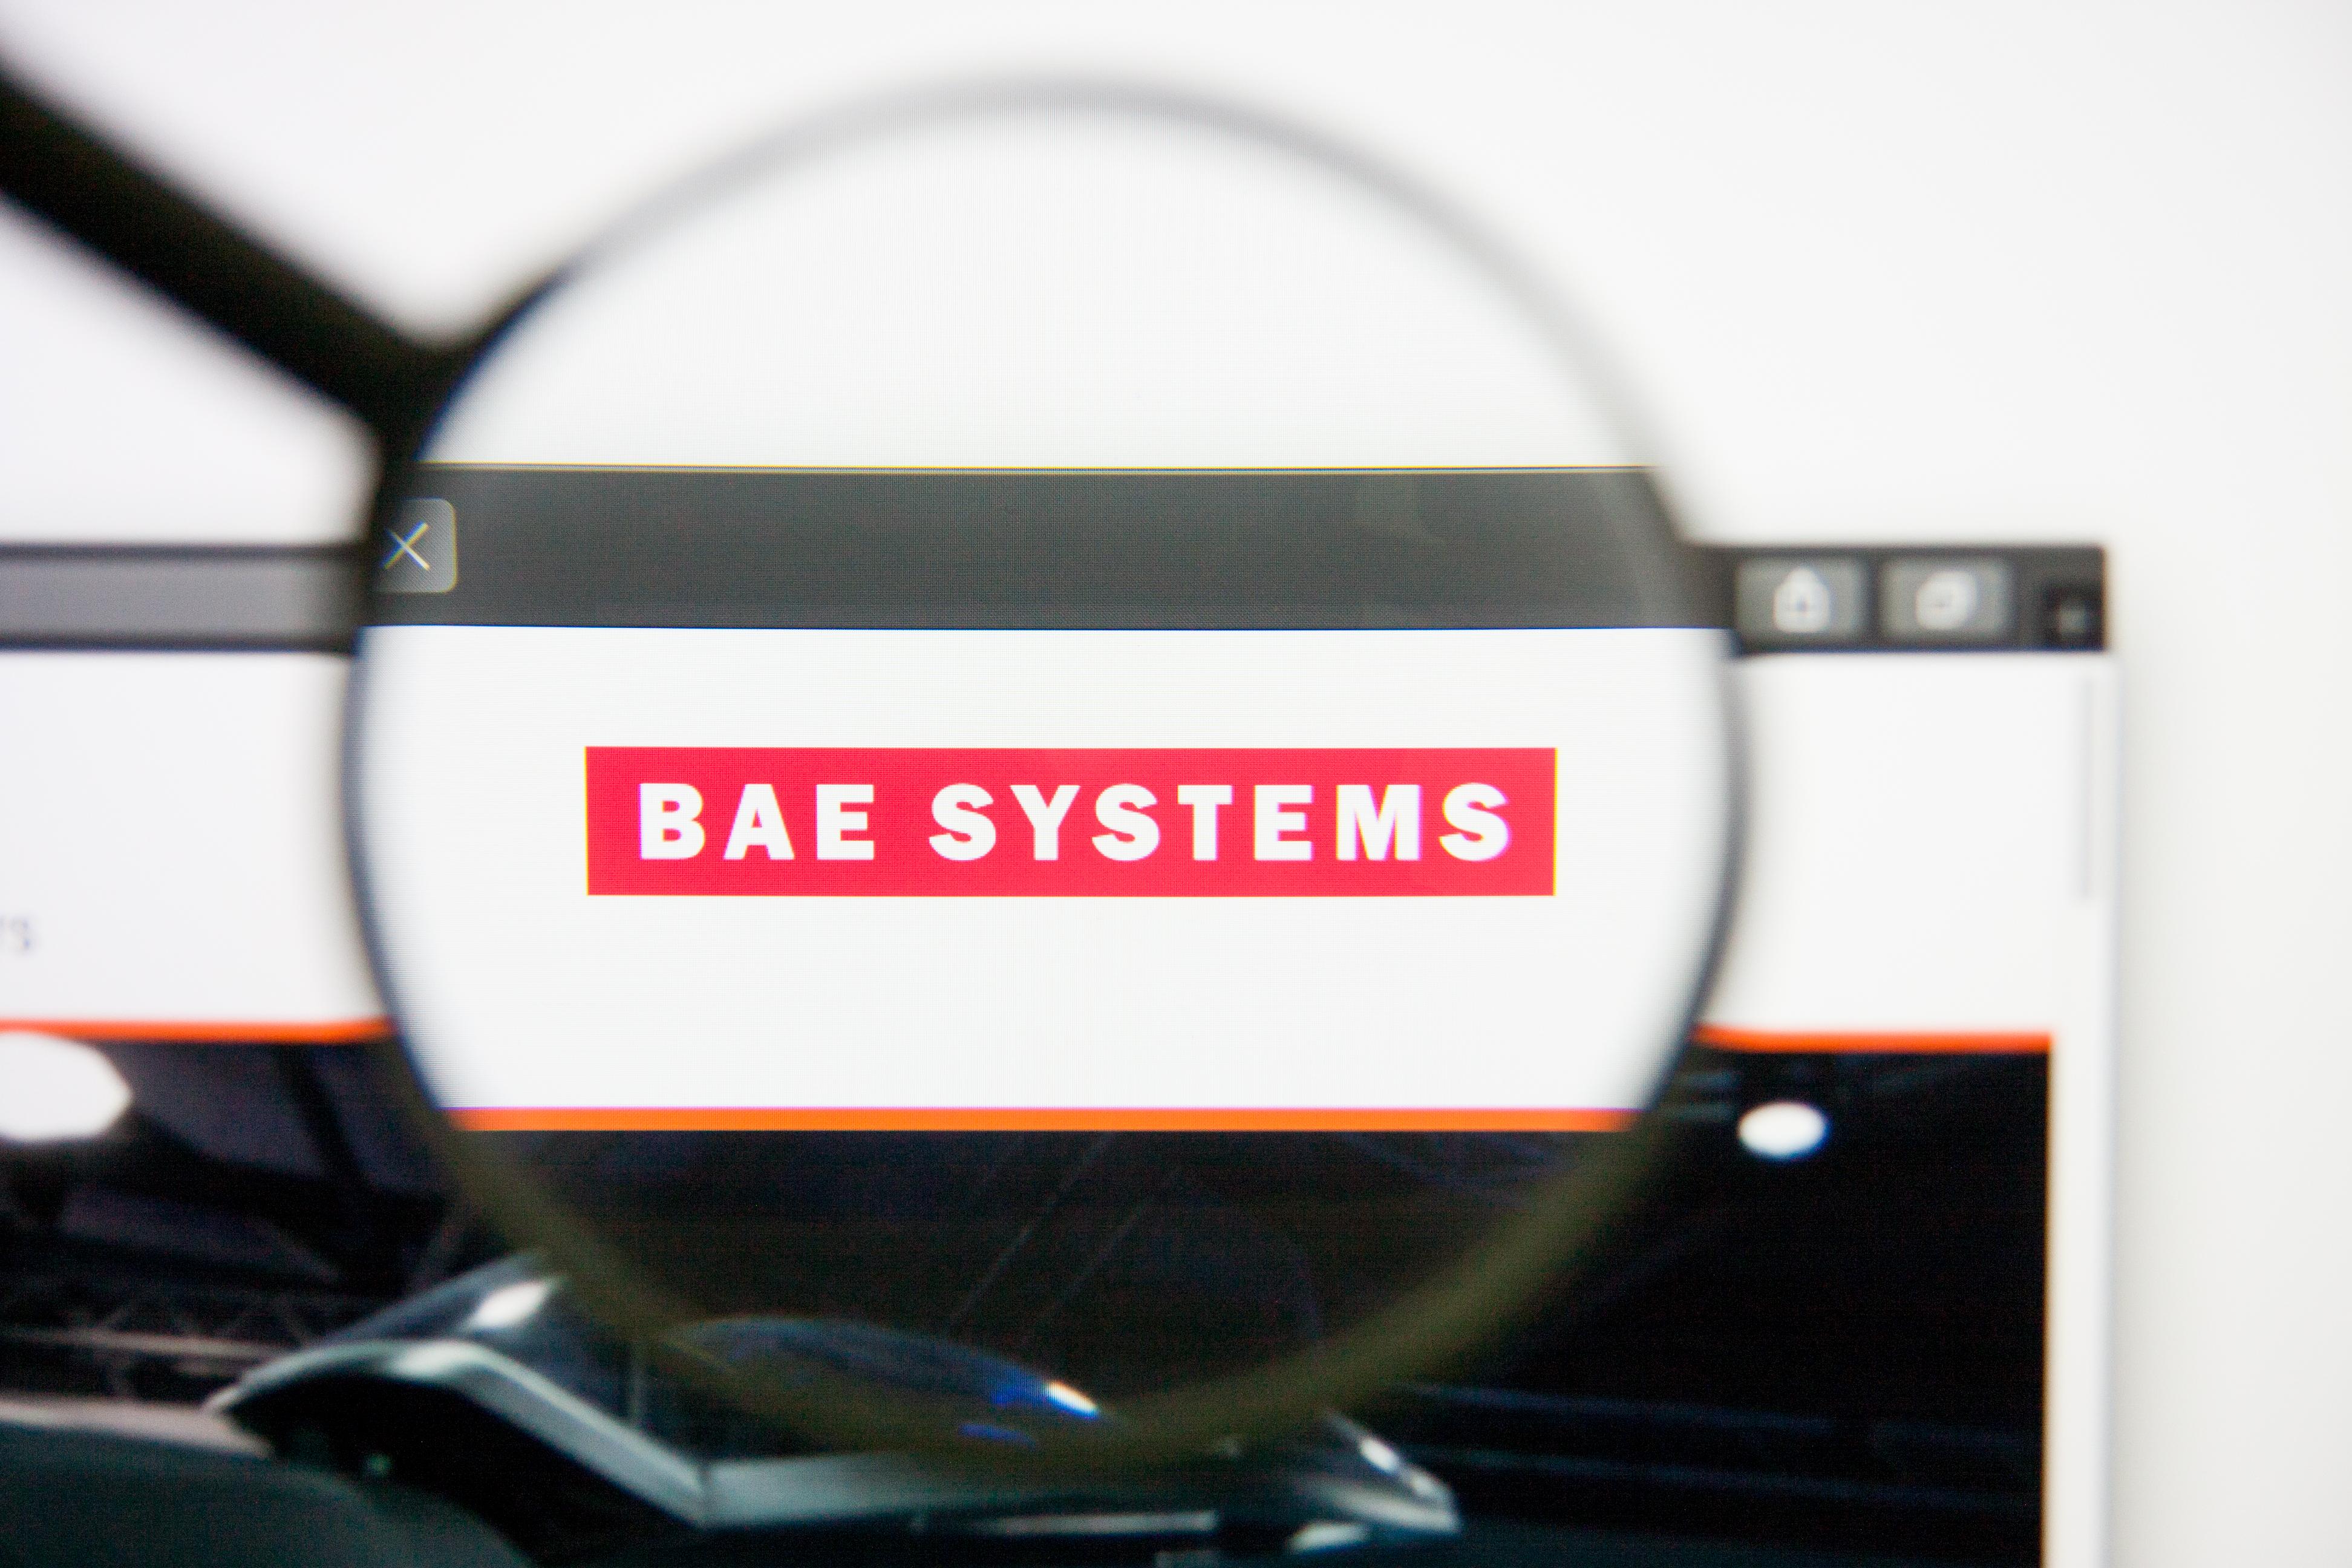 Los Angeles, California, USA - 14 February 2019: BAE Systems aerospace website homepage. BAE Systems logo visible on display screen.